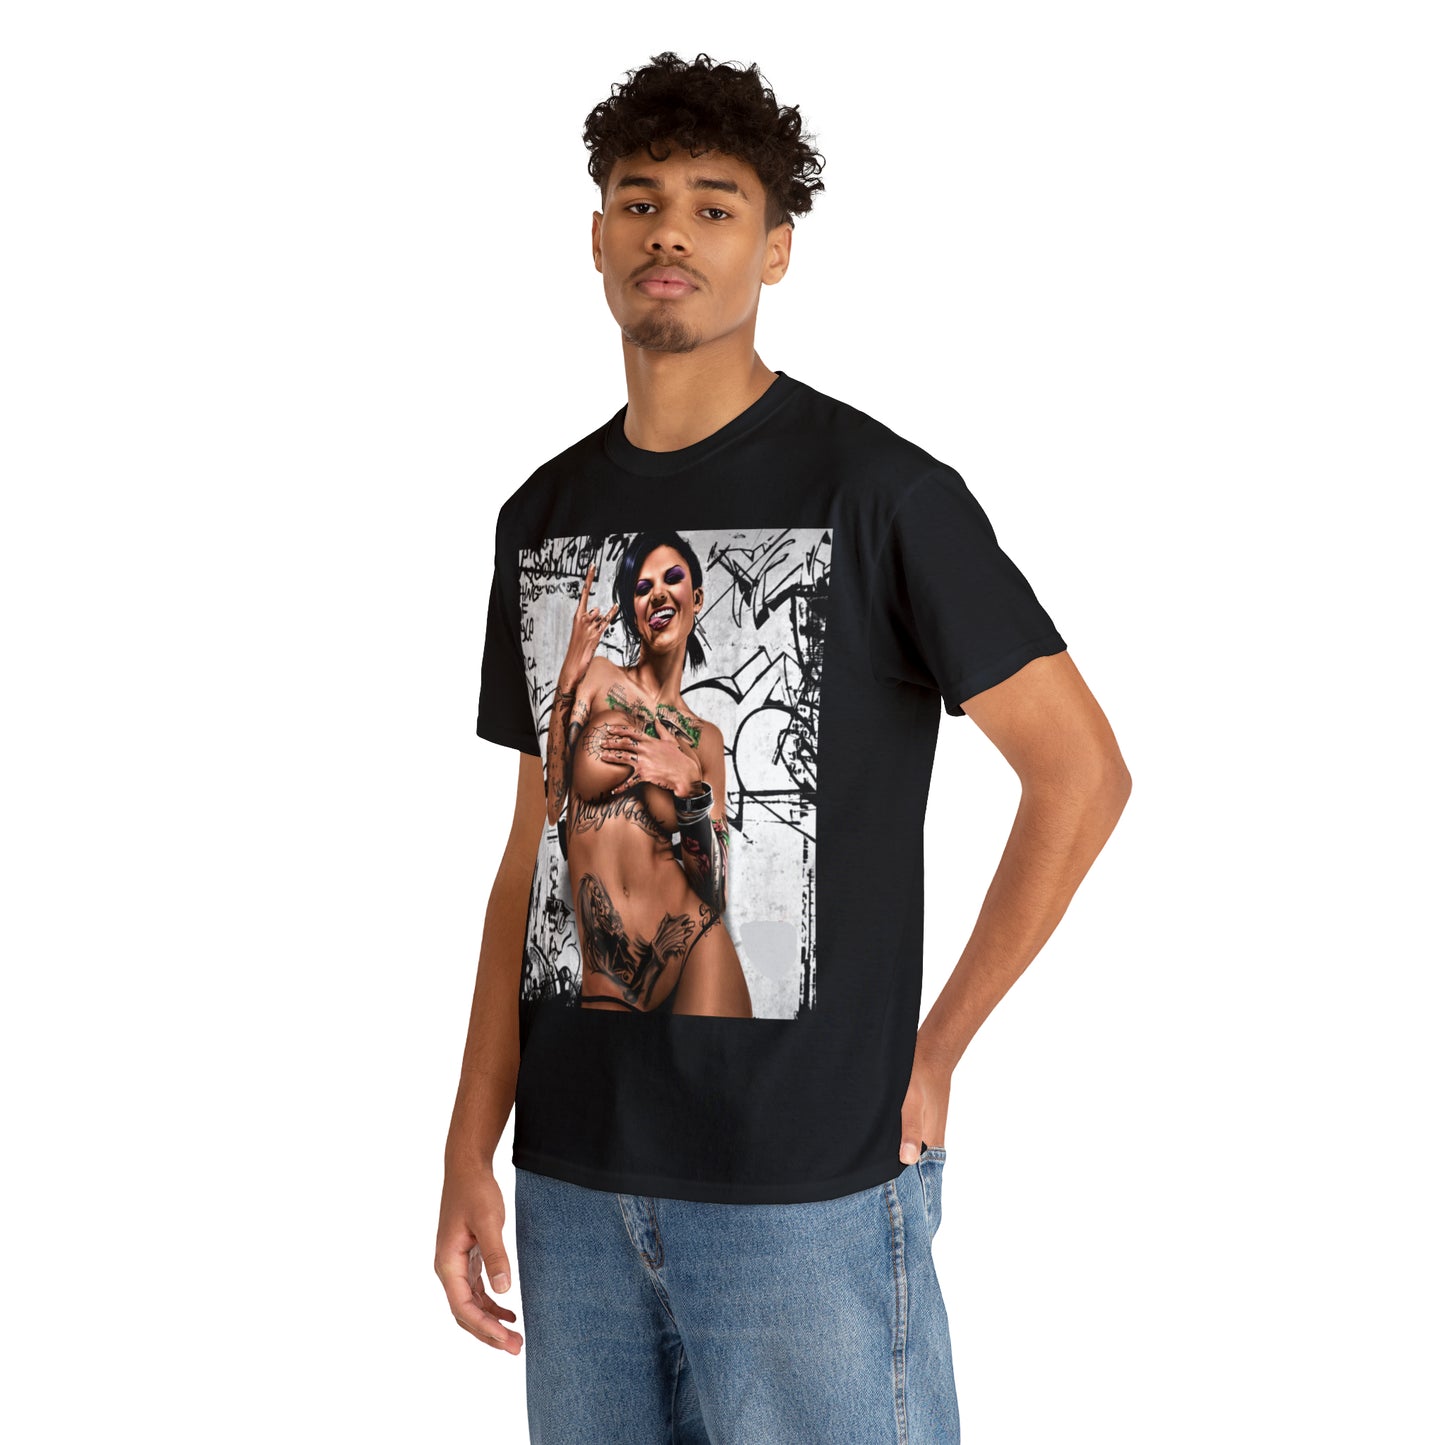 Rotten To The Core Shirt (Bonnie Rotten)